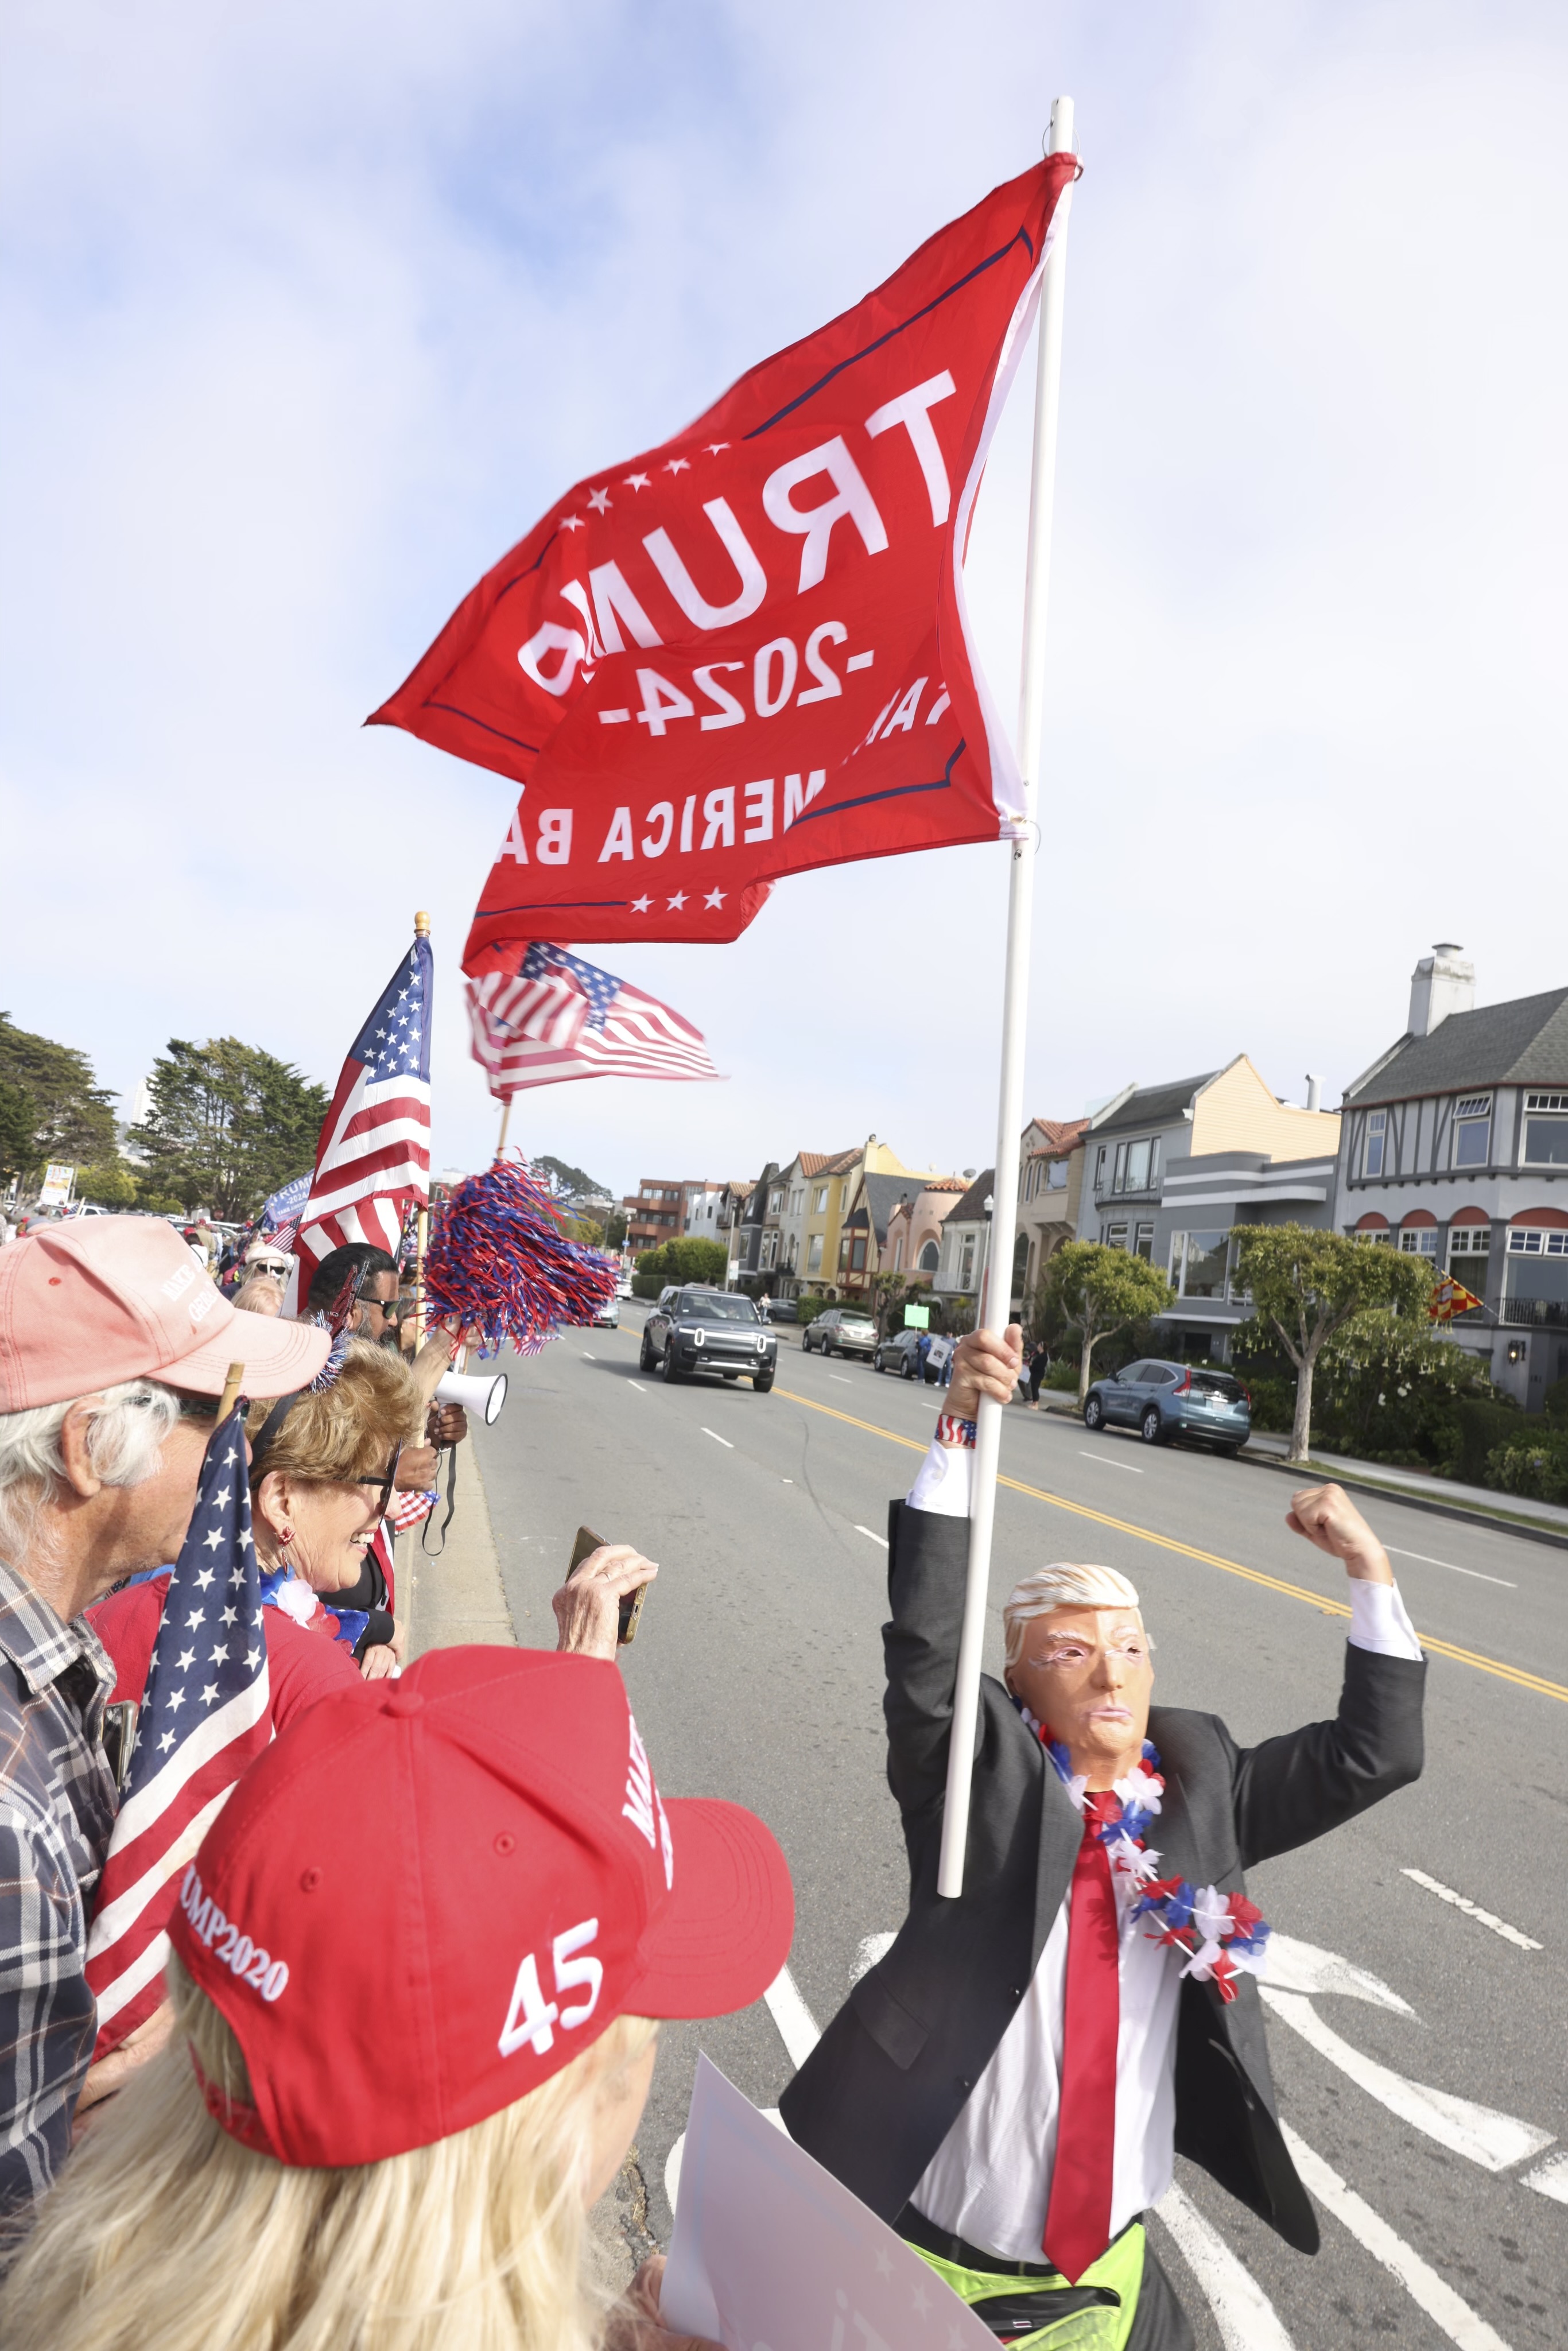 People gather roadside, holding American flags and signs supporting Trump 2024. A person in a Trump mask and suit raises a large red flag with &quot;Trump 2024&quot; printed on it.